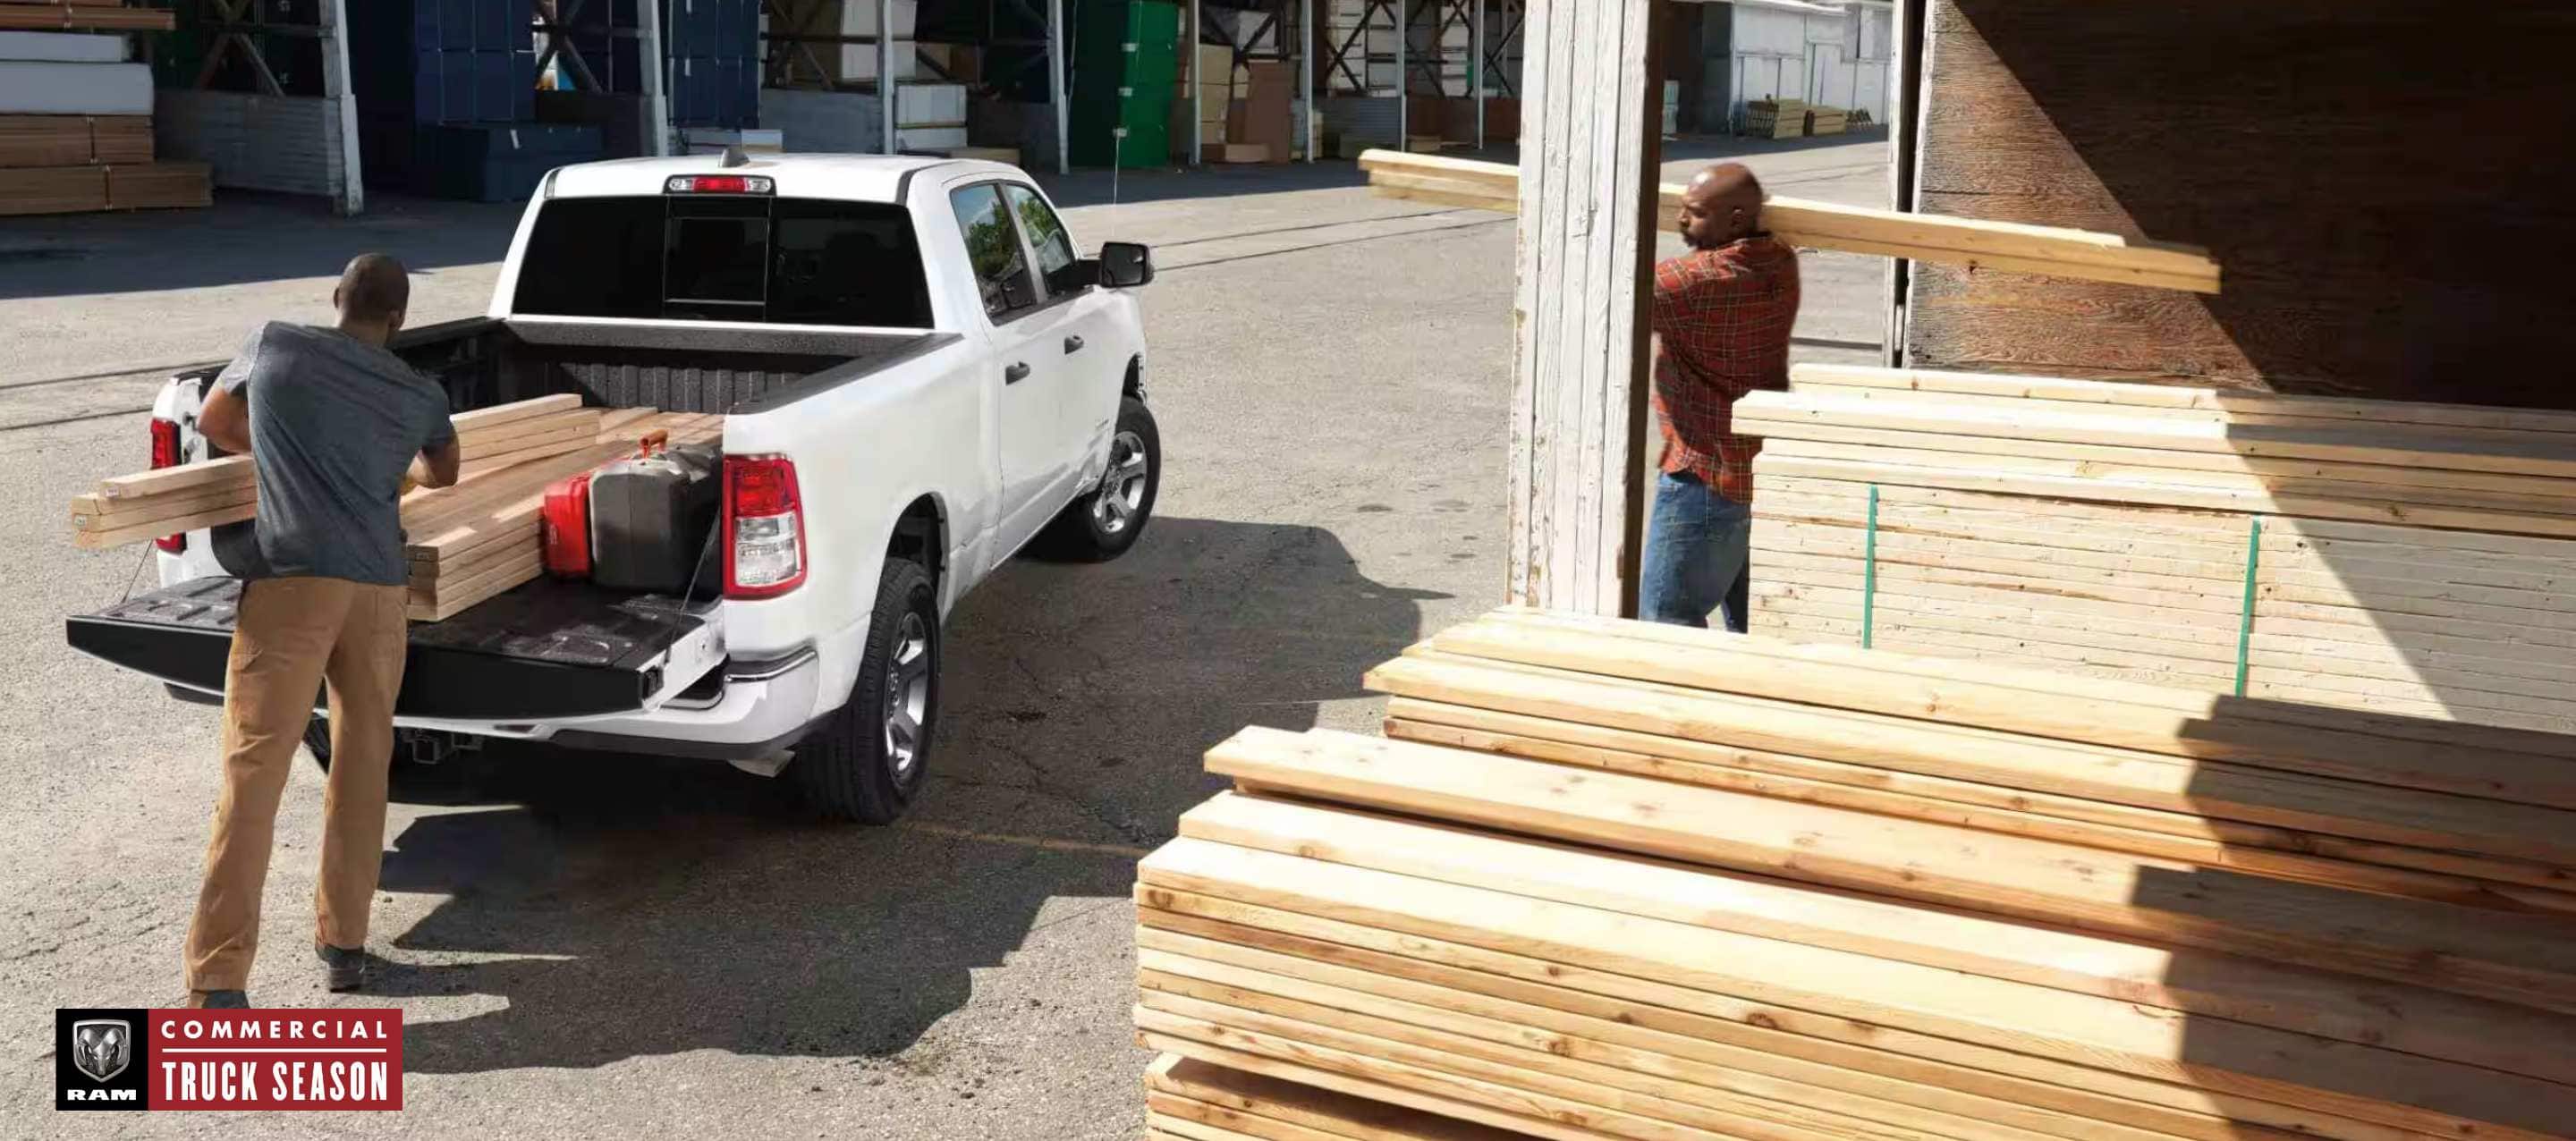  A rear angle of a white 2024 Ram 1500 Tradesman Crew Cab parked at a lumber yard with its tailgate open and a man loading lumber into the truck bed as a second man brings additional lumber. Ram Commercial Truck Season.